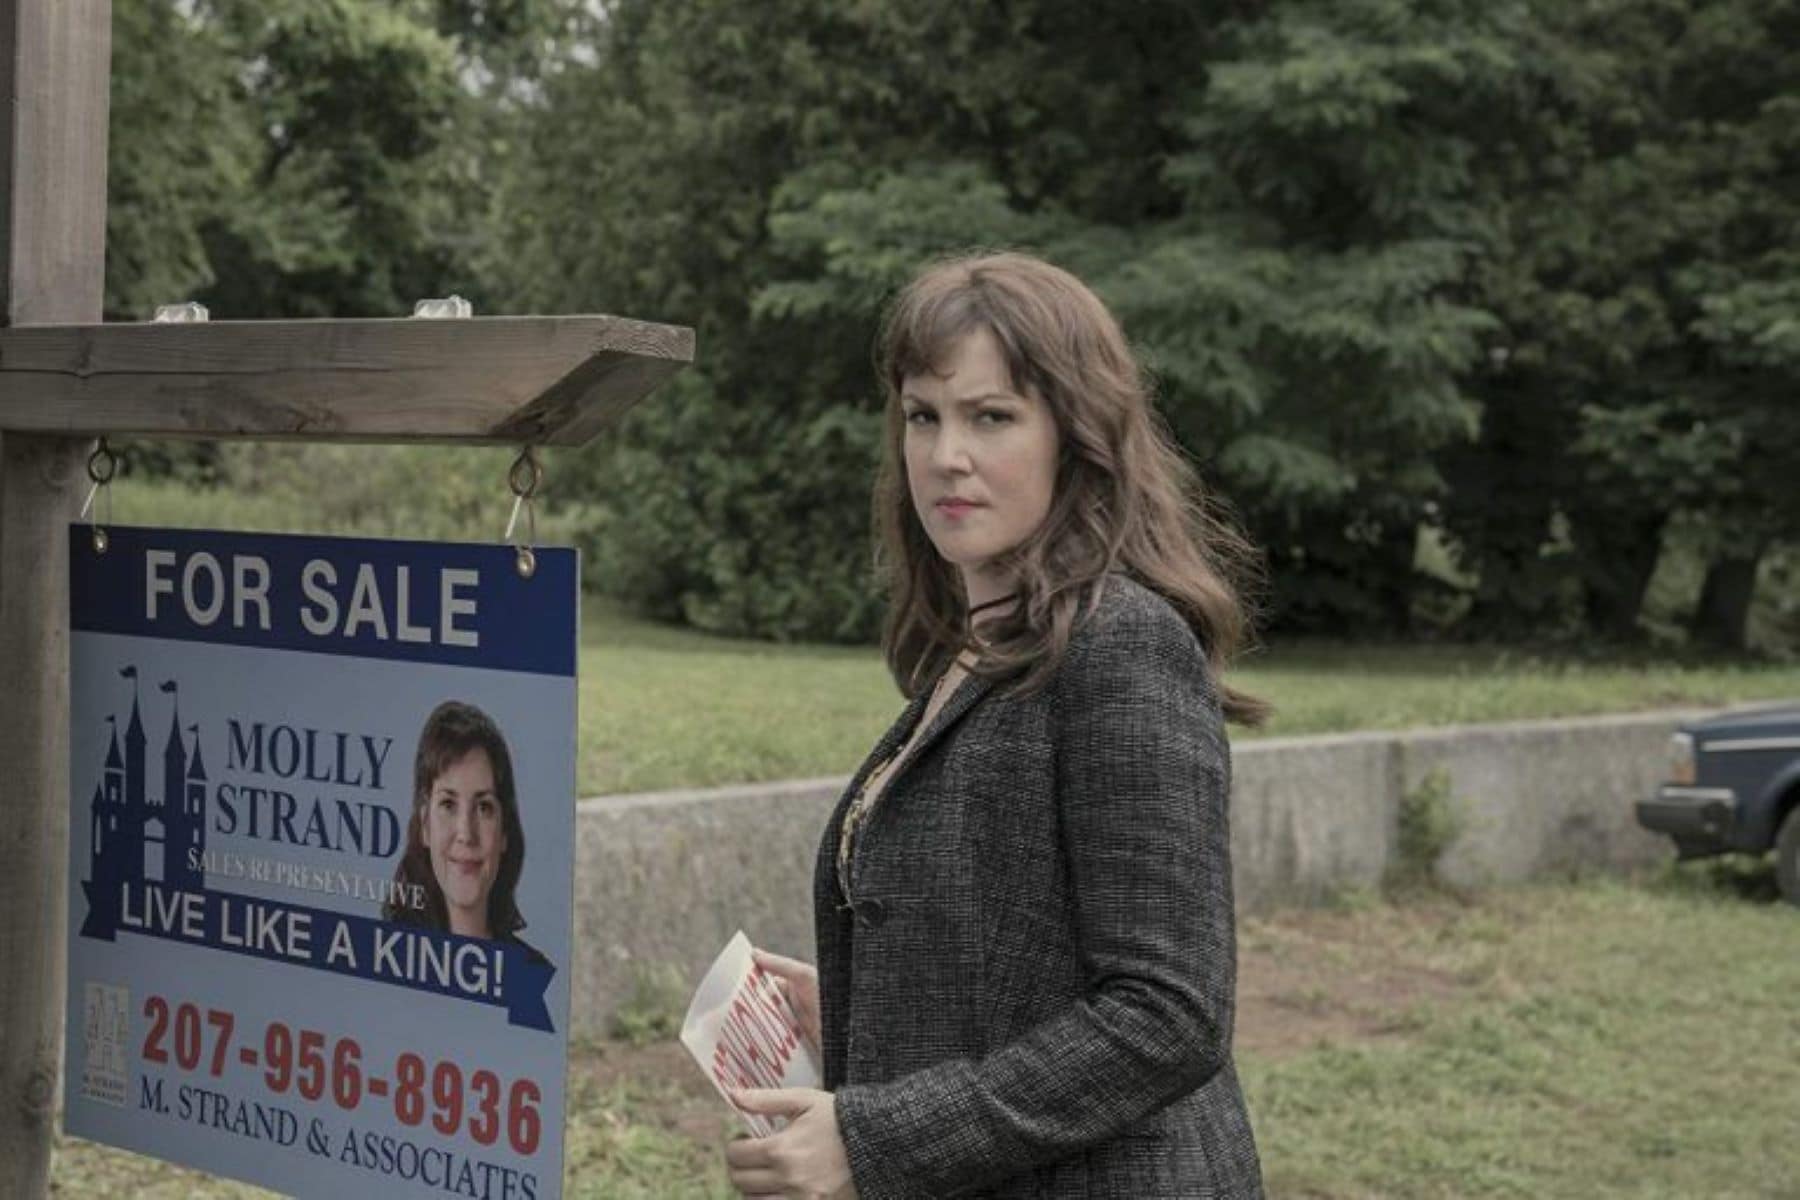 A woman adjusts a "for sale" sign in this photo by Warner Bros. Television.